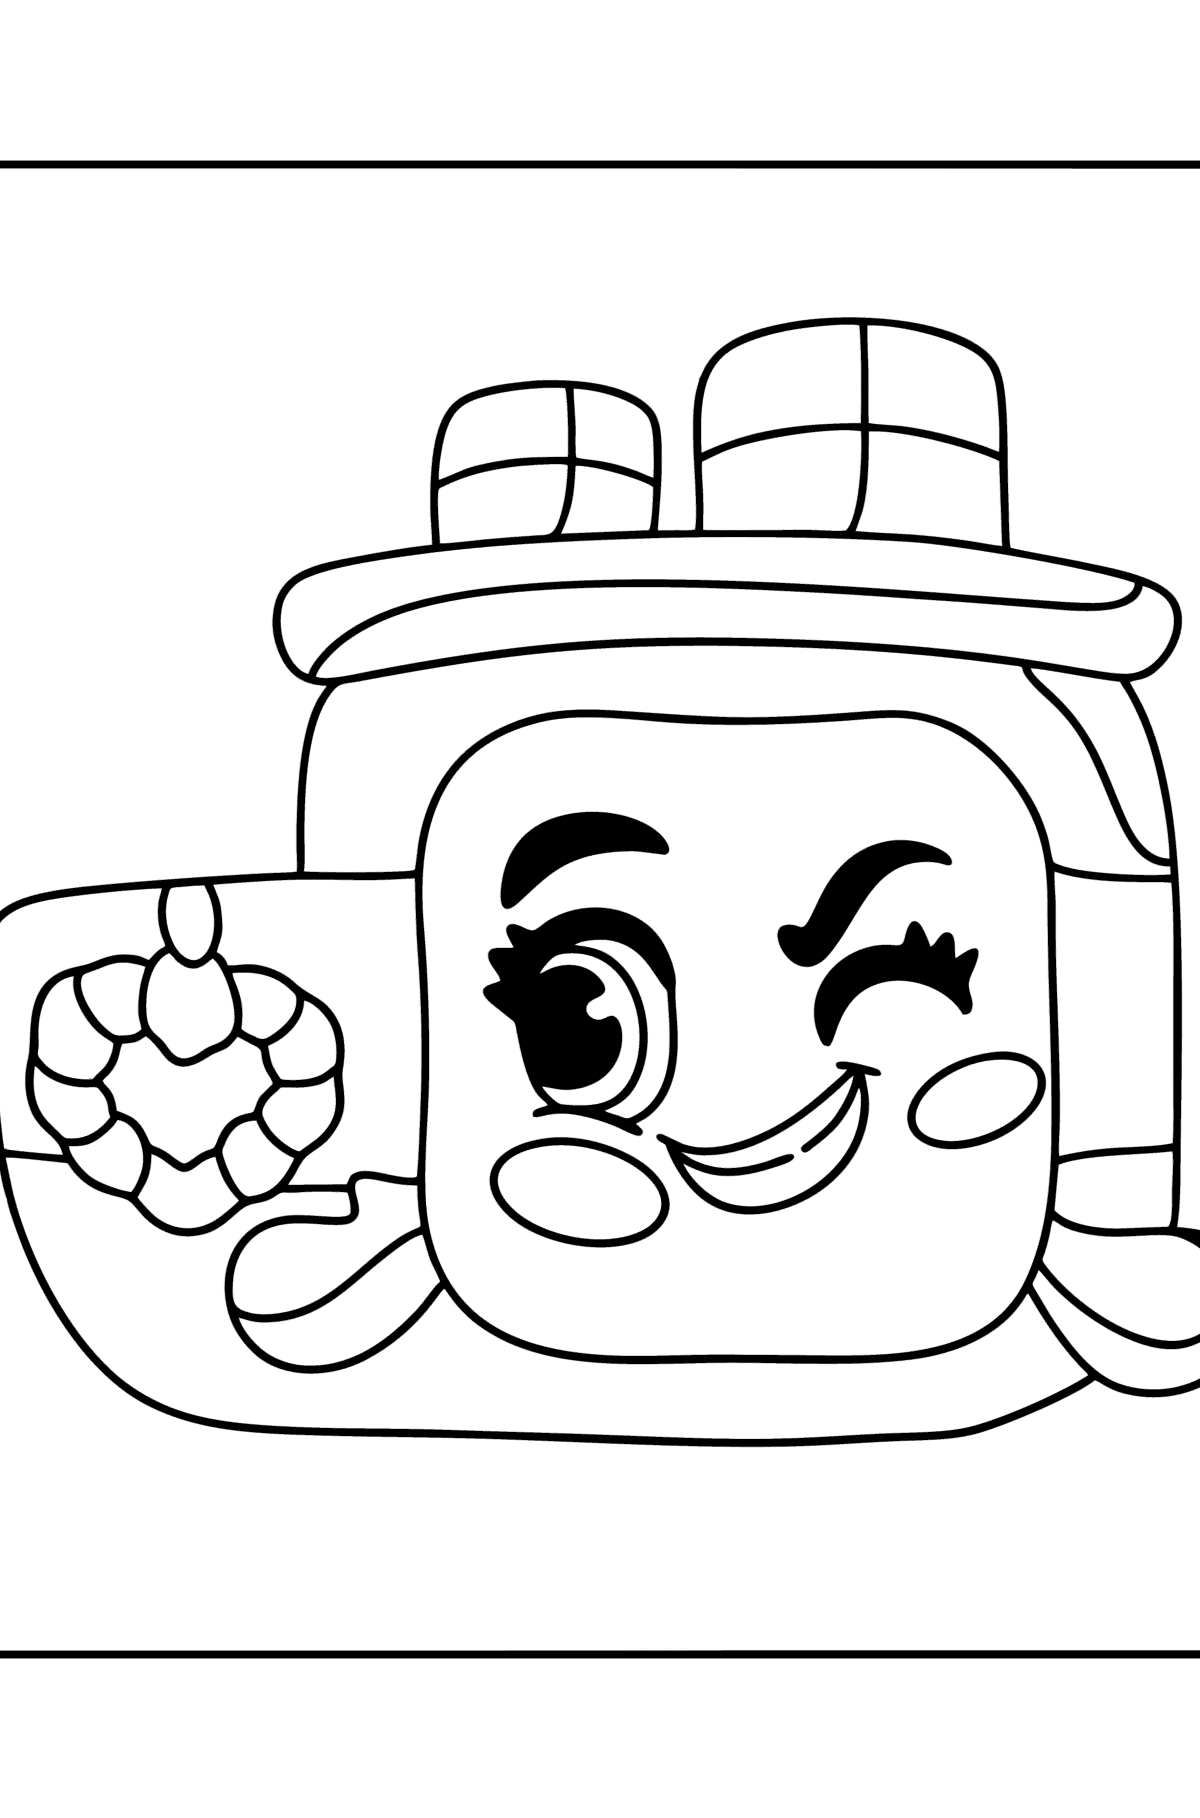 Coloring page MojiPops Floaty - Coloring Pages for Kids